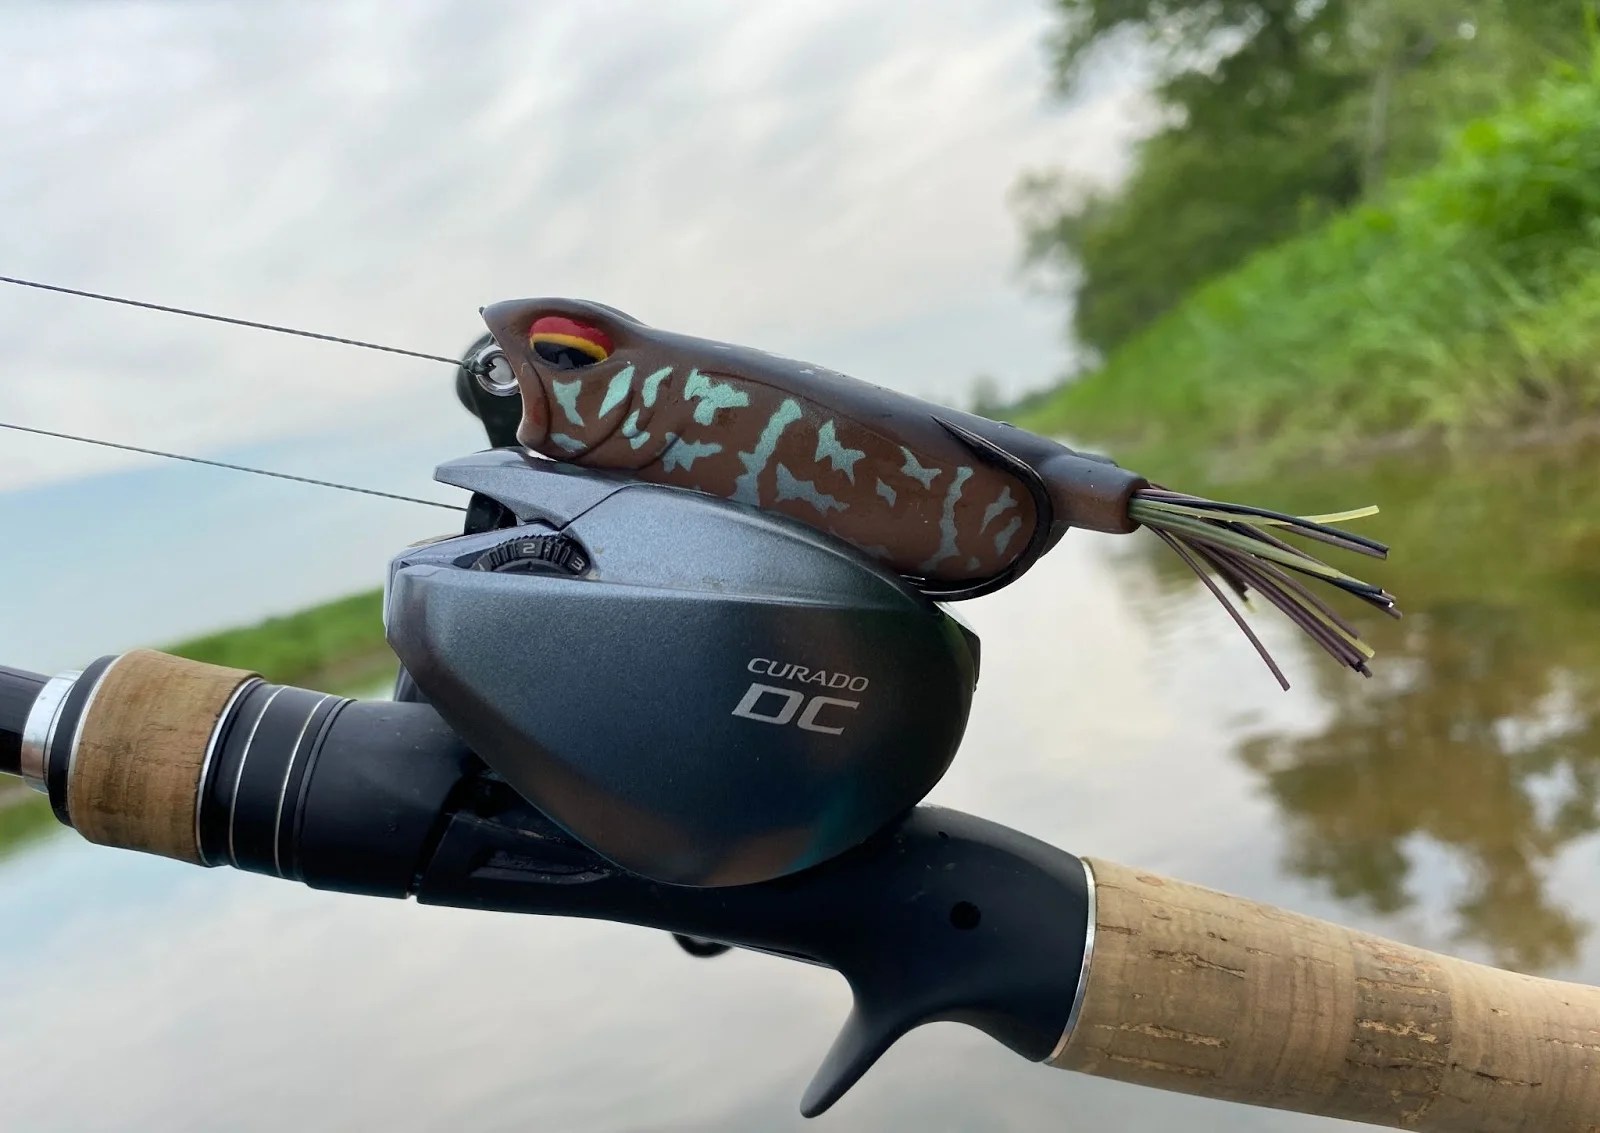 The Shimano Curado DC is one of the reels for frog lures